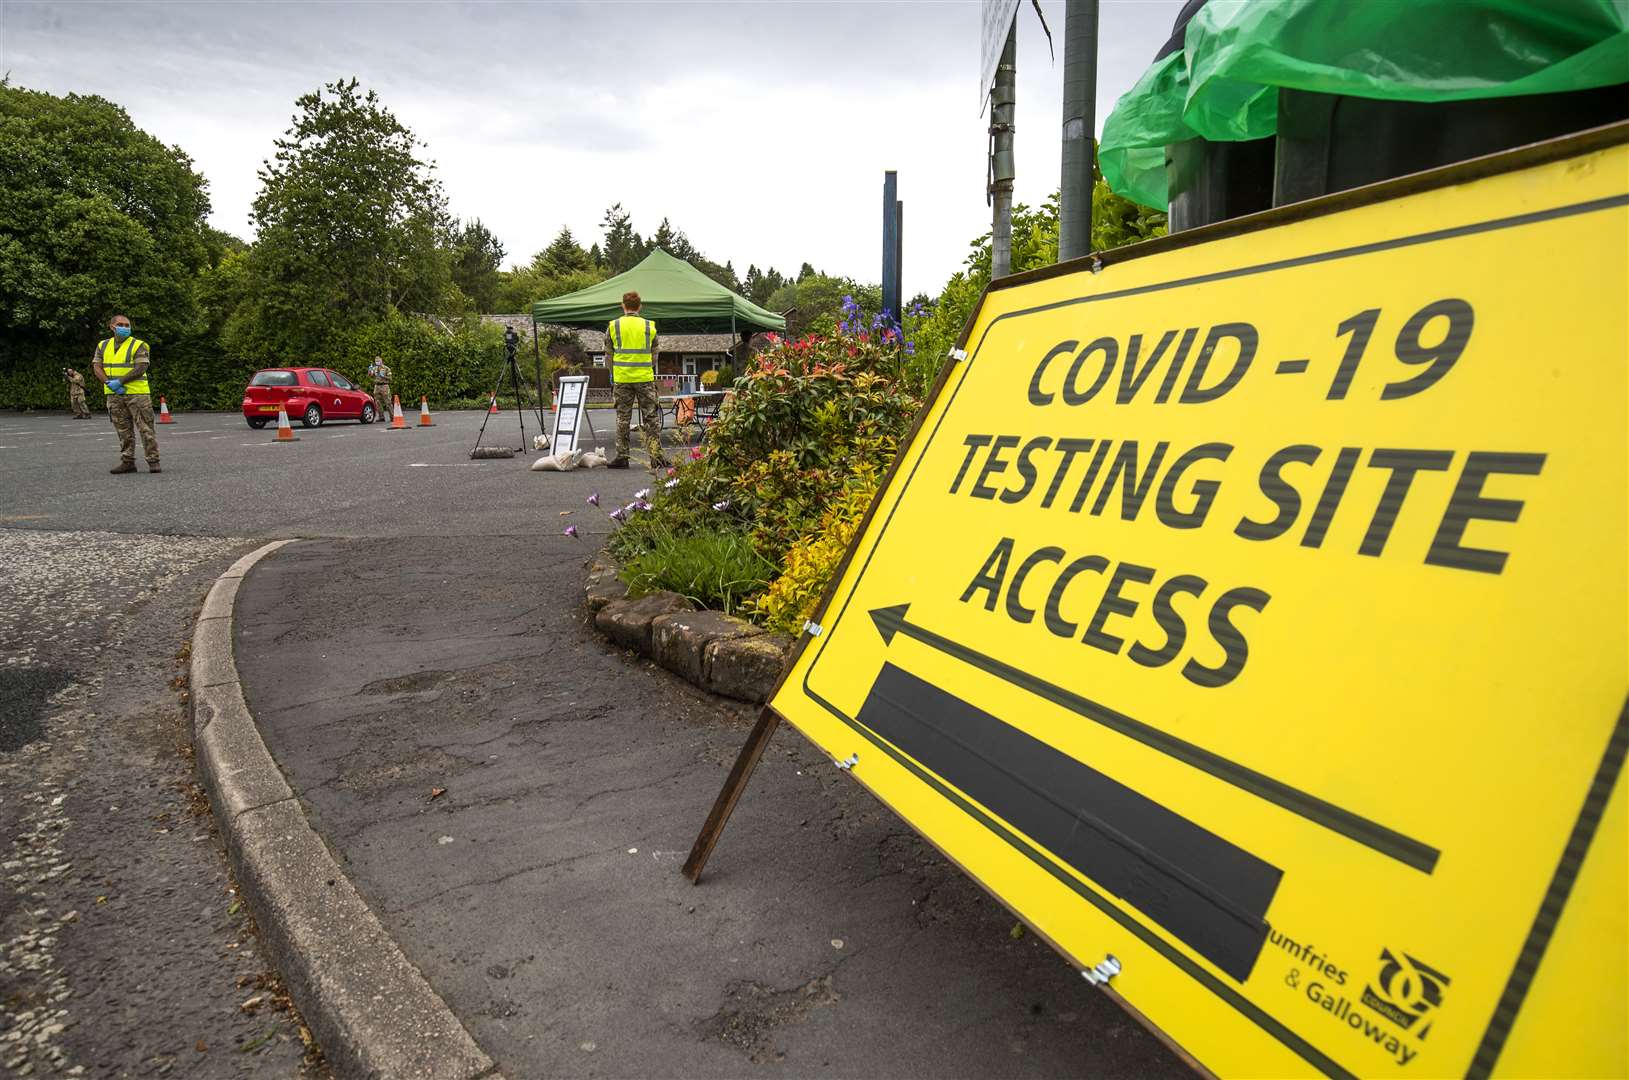 Figures for new Covid-19 cases are often lower at the weekends, an academic has said (Jane Barlow/PA)